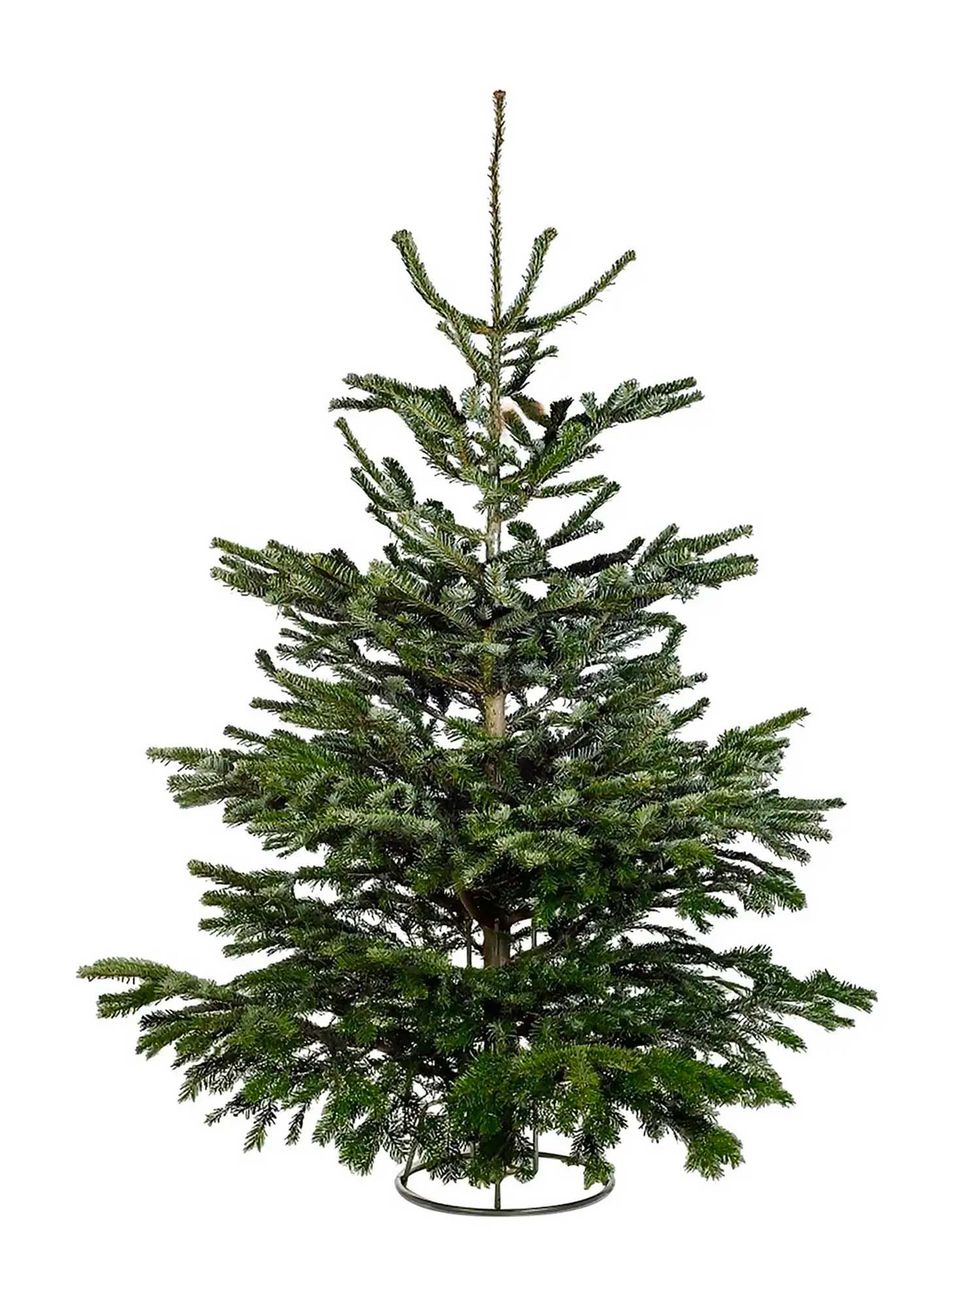 Our ultimate guide to buying a real Christmas tree this year